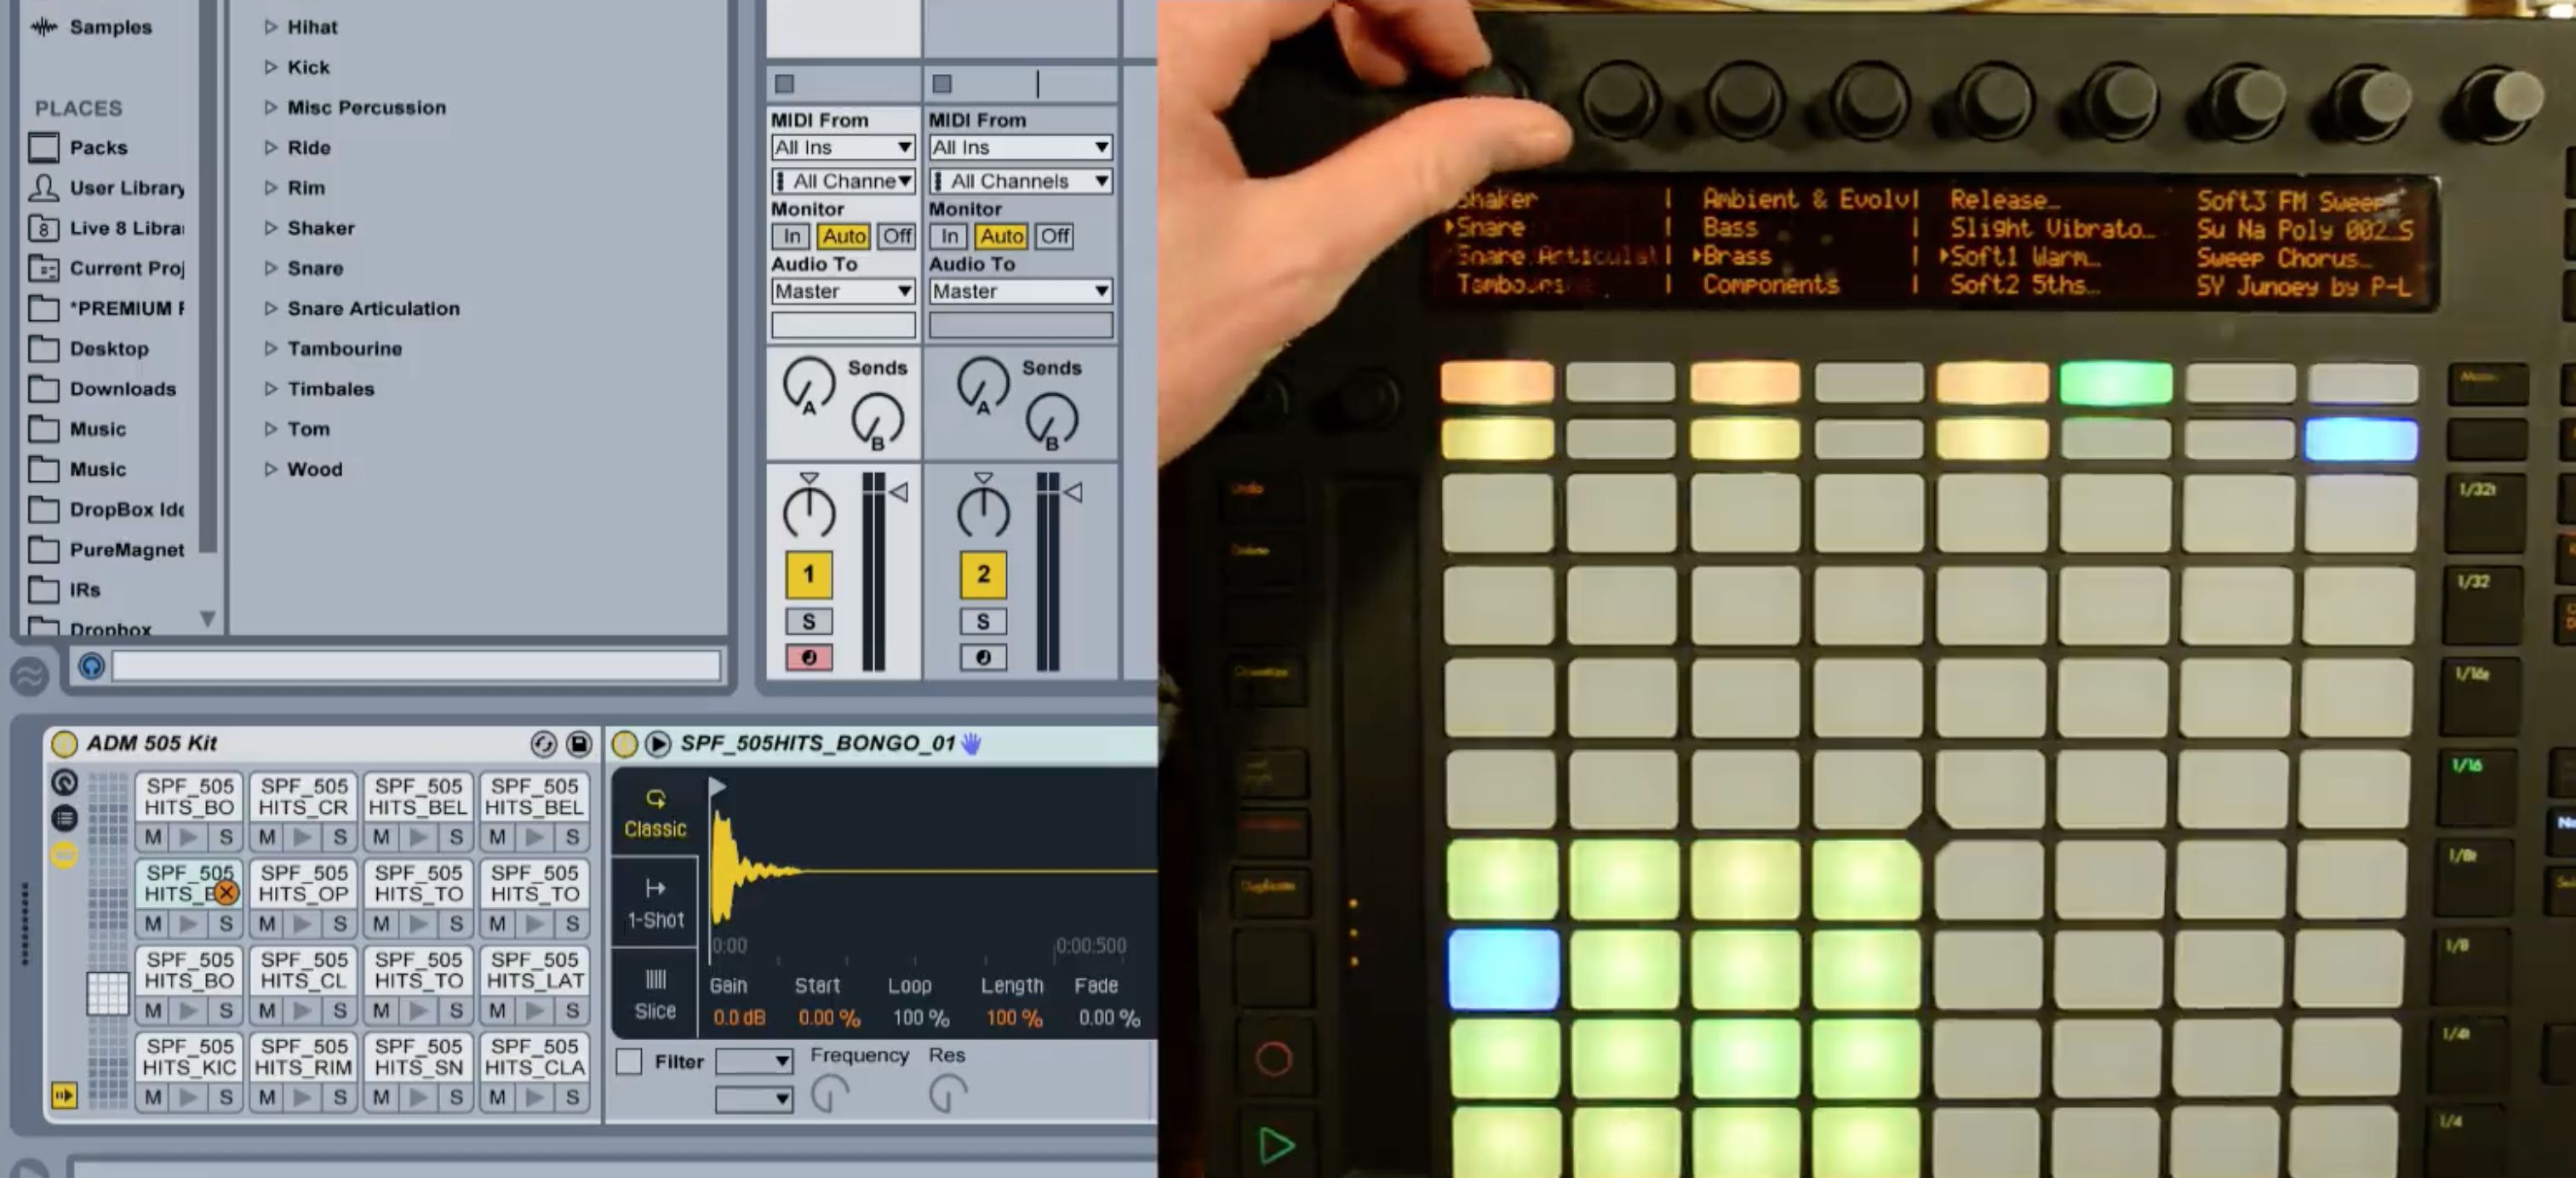 Ableton Push 1 Owners: These Improvements Will Make You Happy